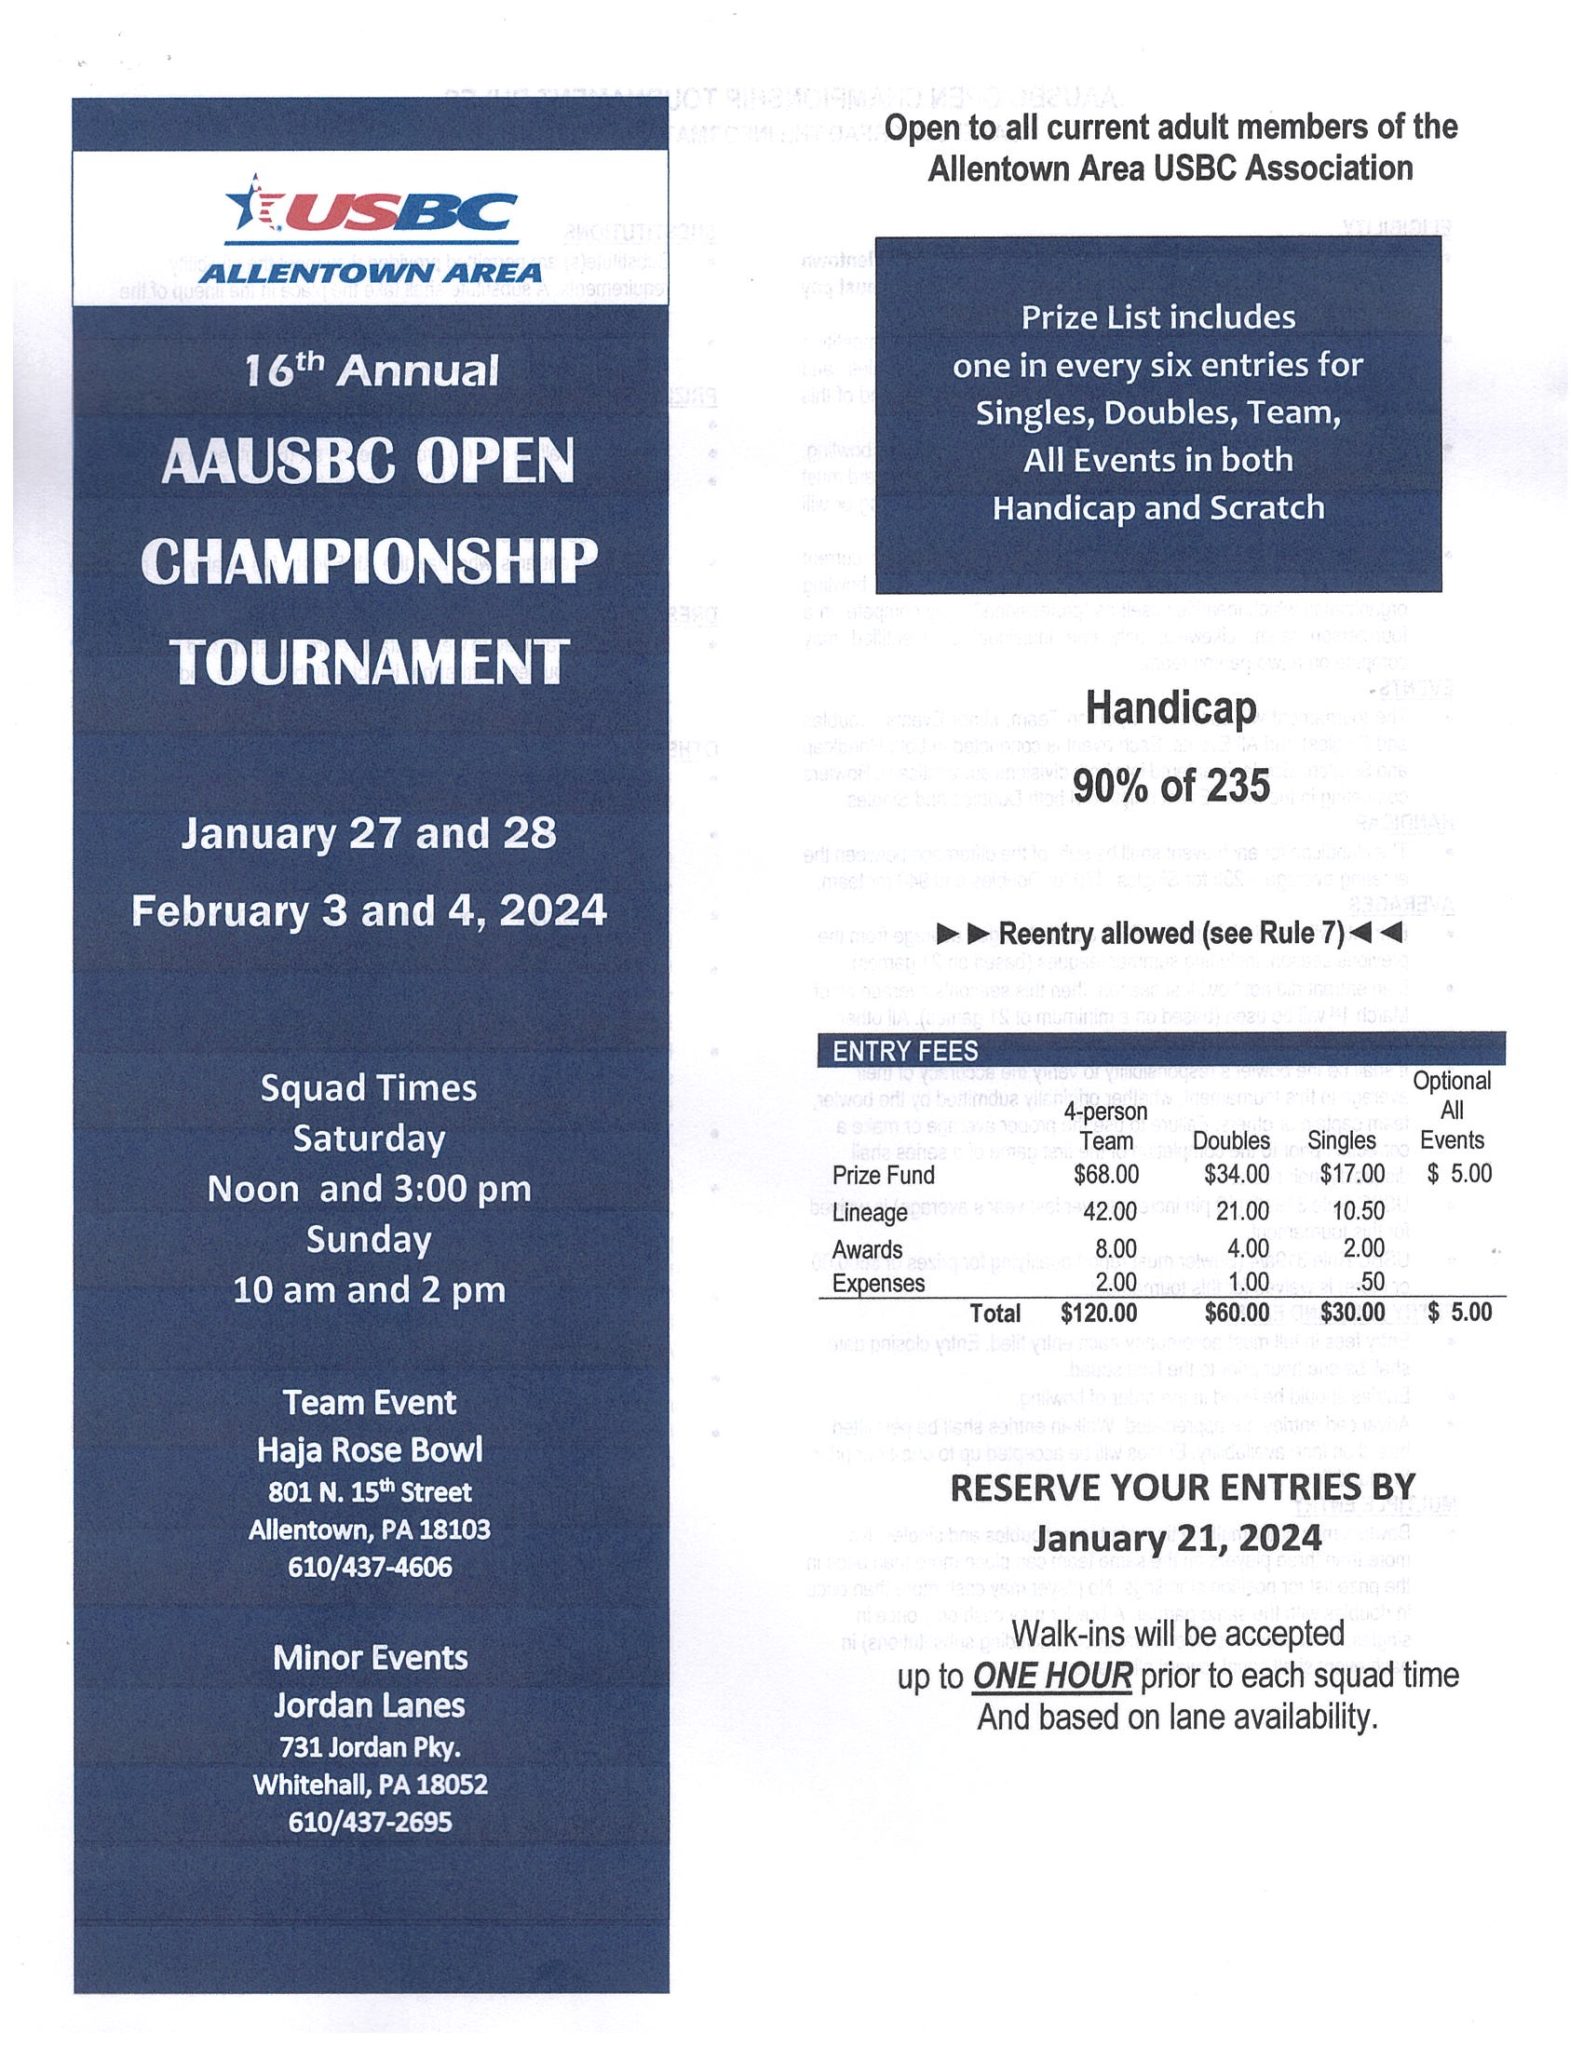 16th Annual AAUSBC Open Championship Tournament 2